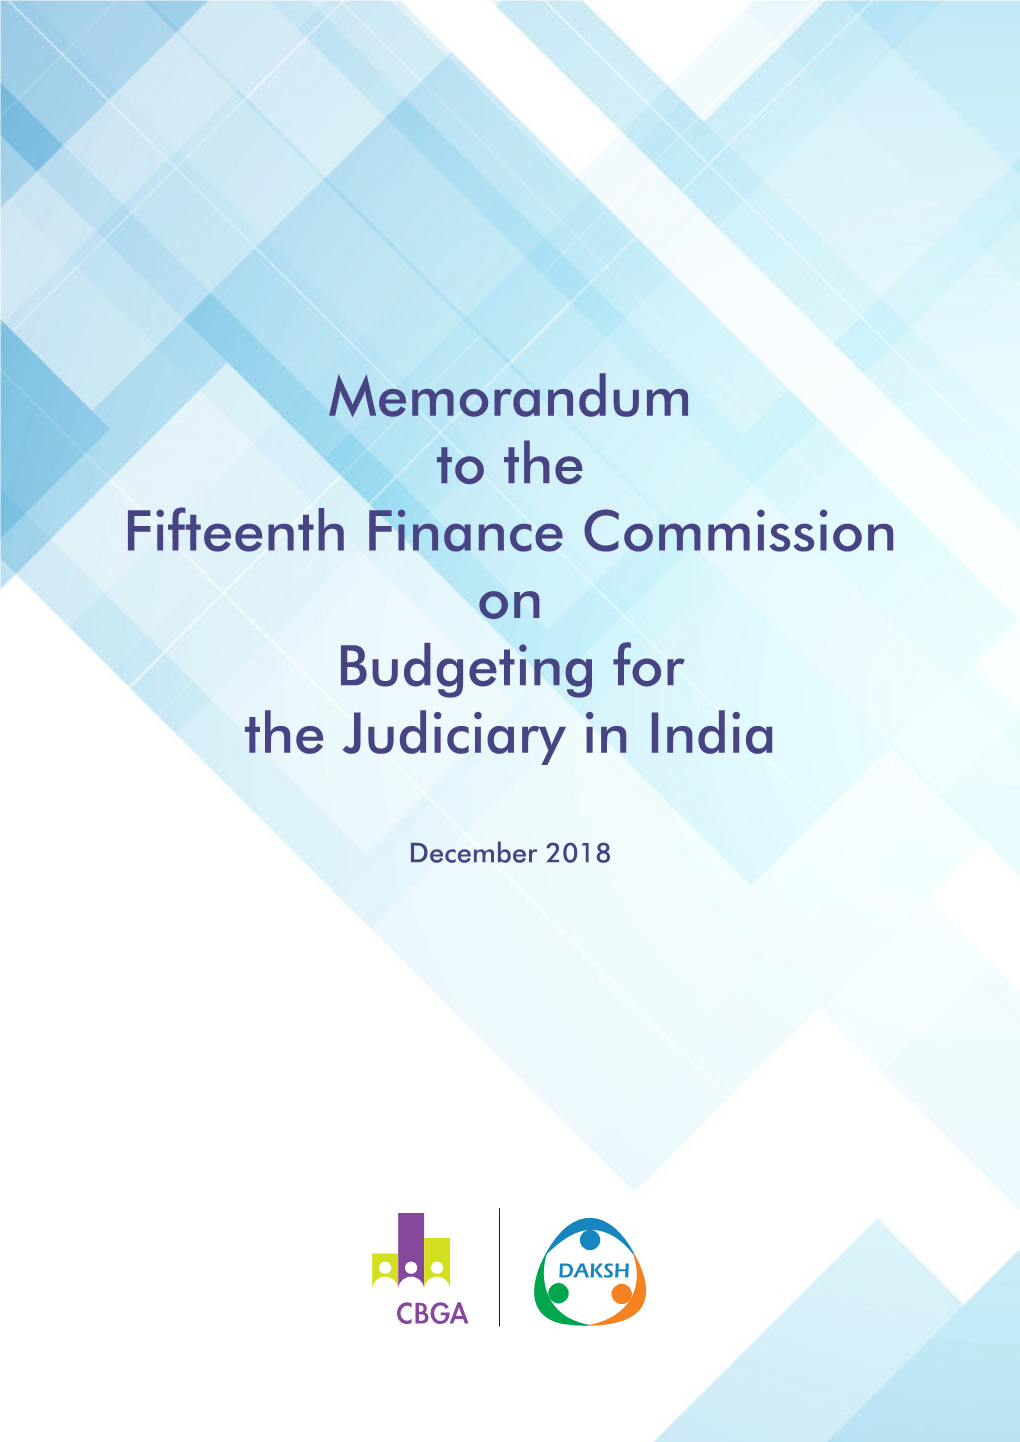 Memorandum to the Fifteenth Finance Commission on Budgeting for the Judiciary in India